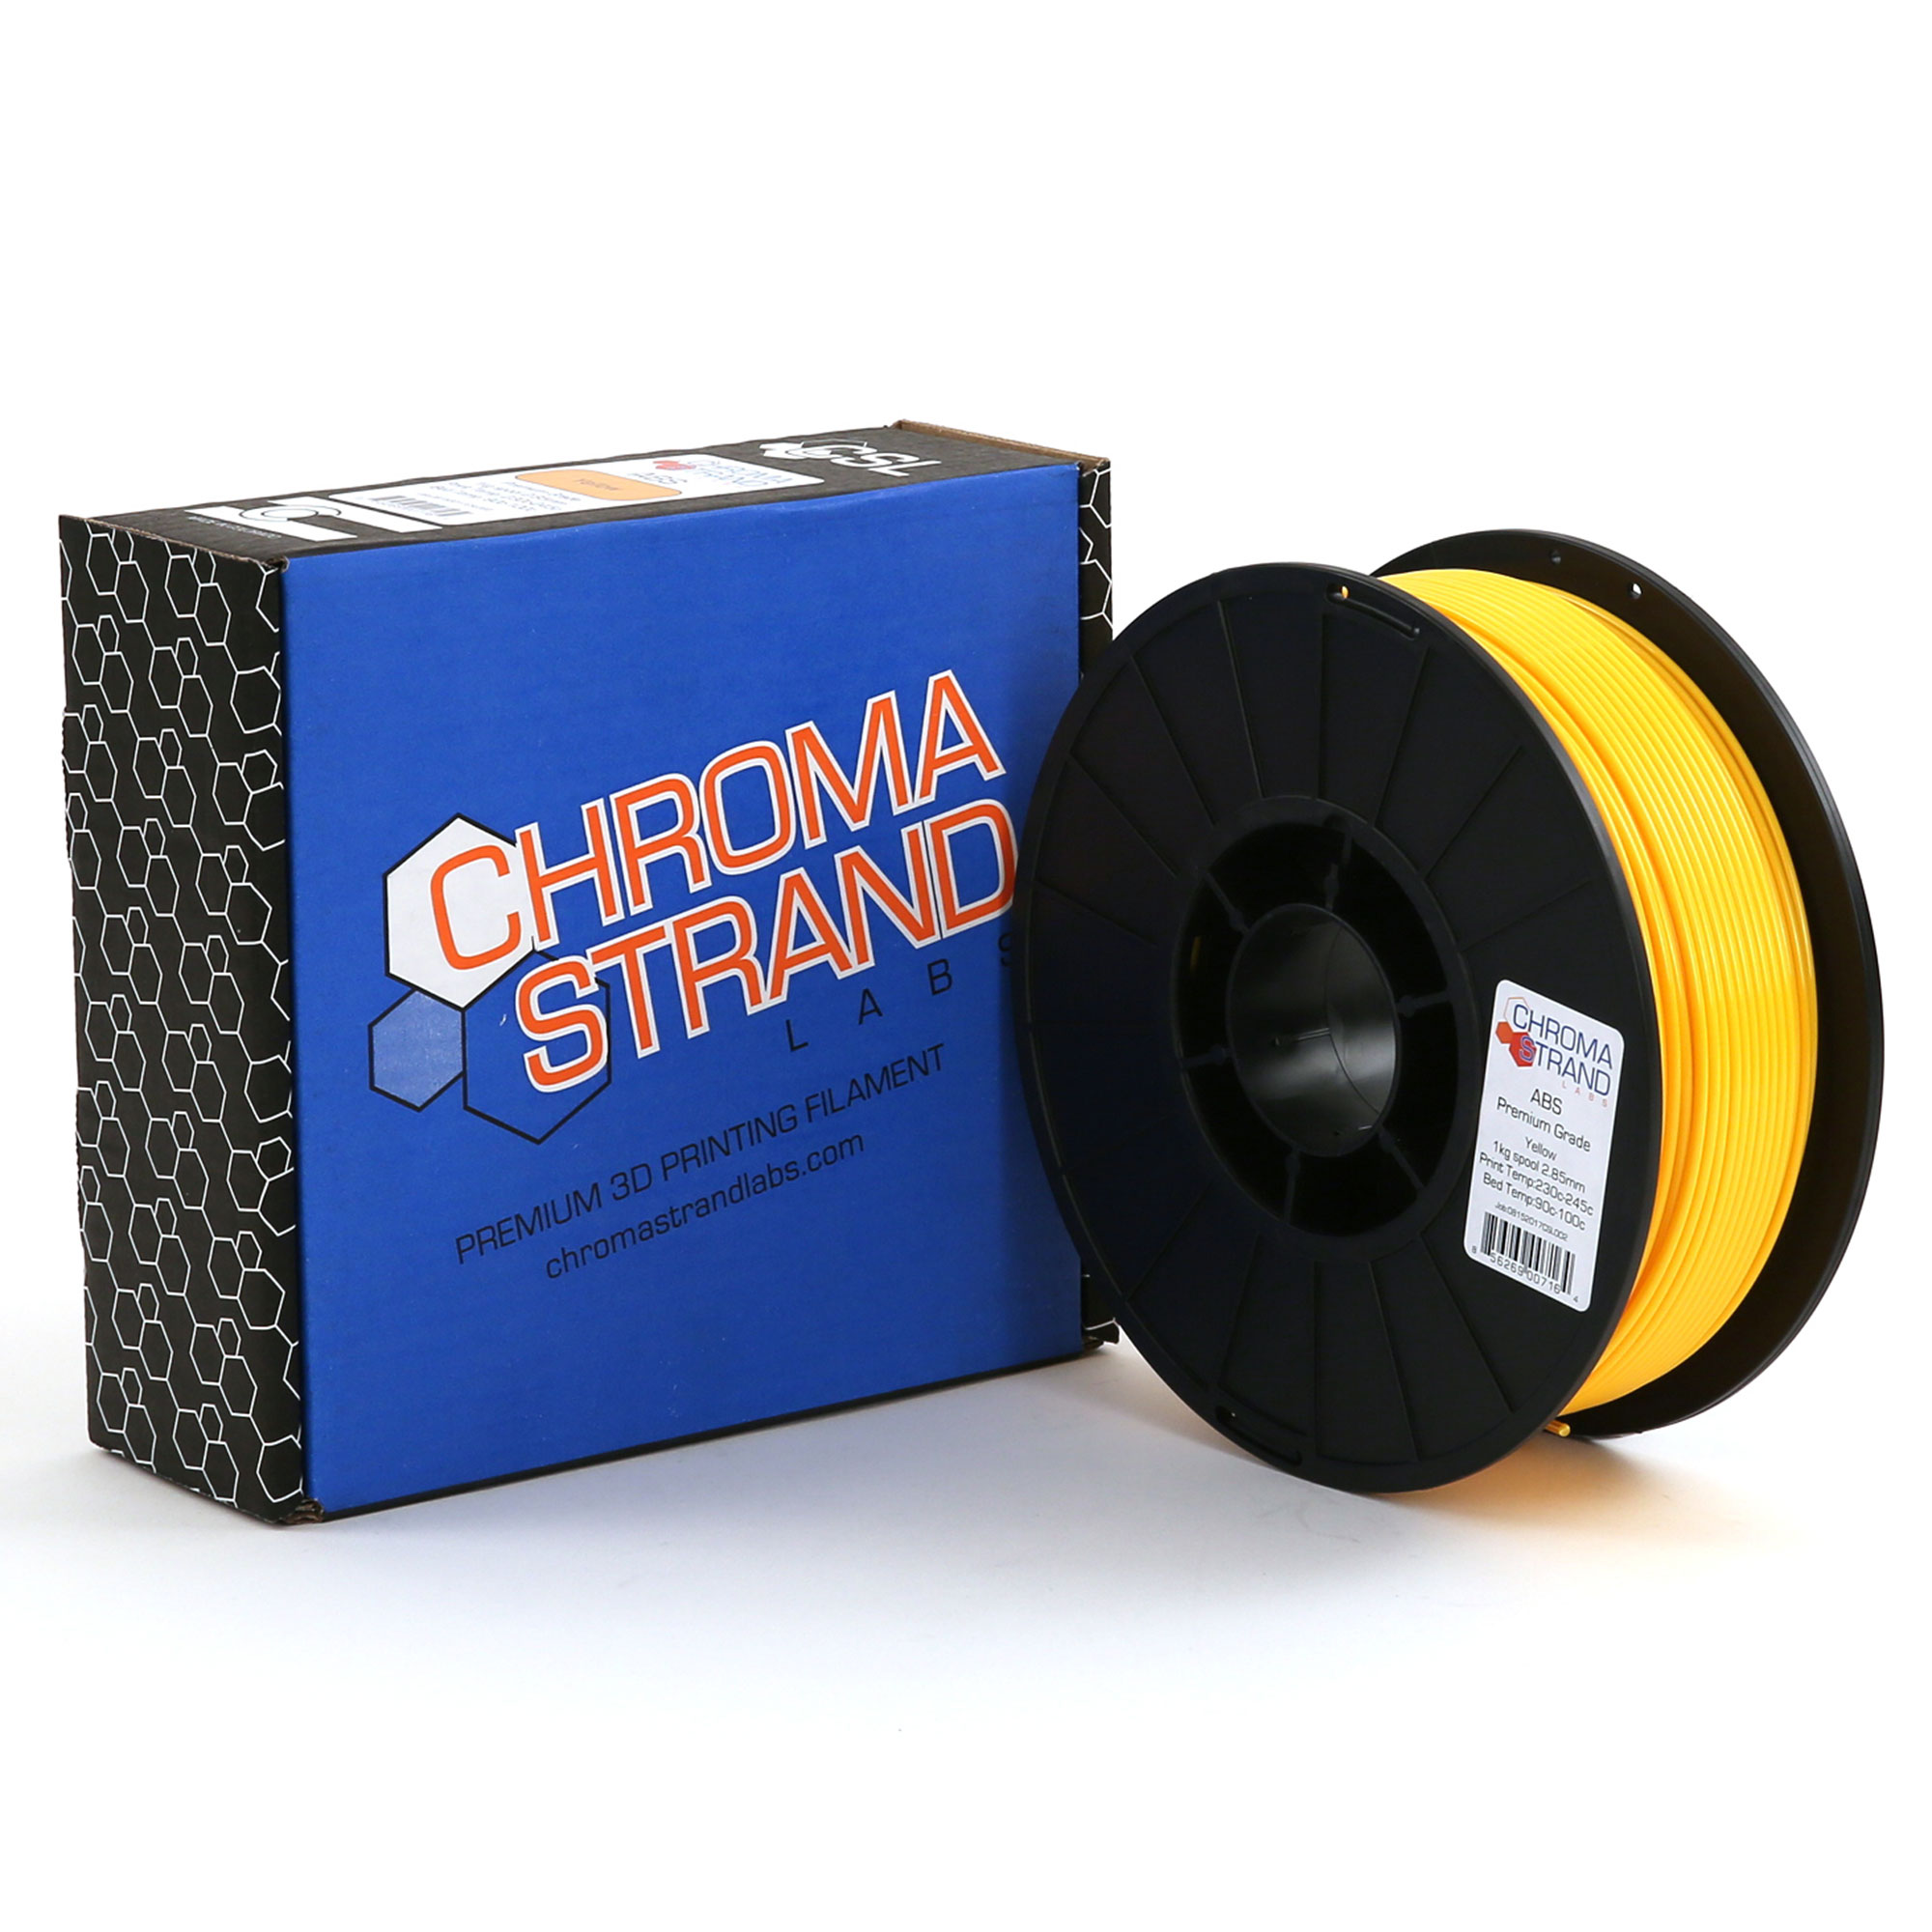 Chroma Strand Abs Filament, Yellow, 2.85mm, 1kg Reel